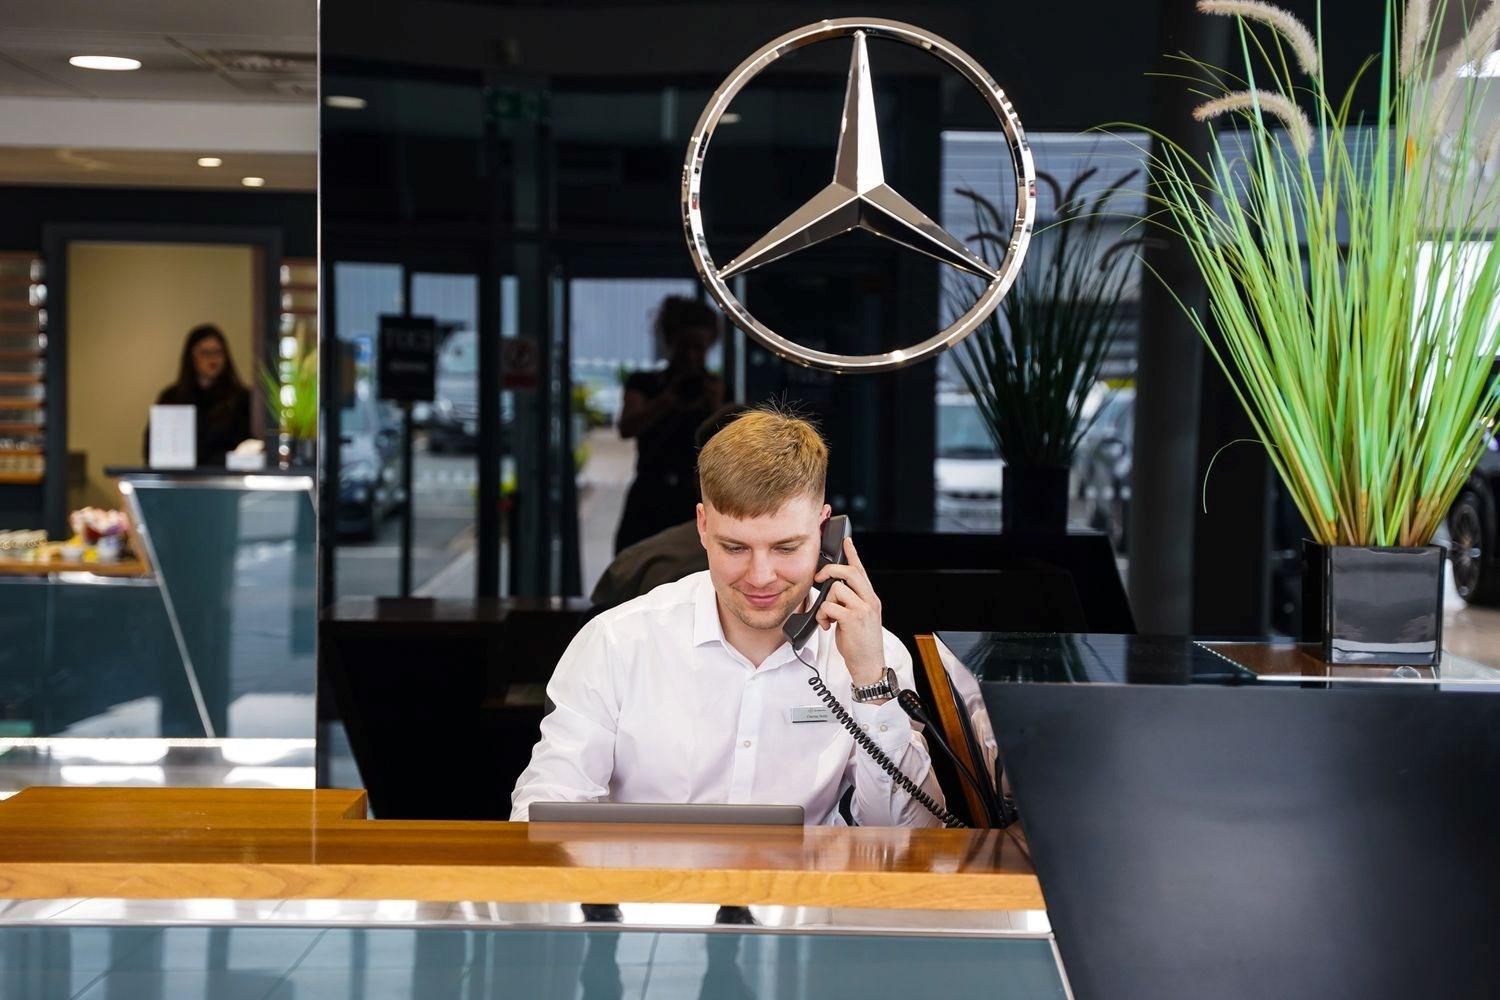 Mercedes-Benz Customer Service Specialist answers customer phone call in the Mercedes-Benz of Belfast showroom